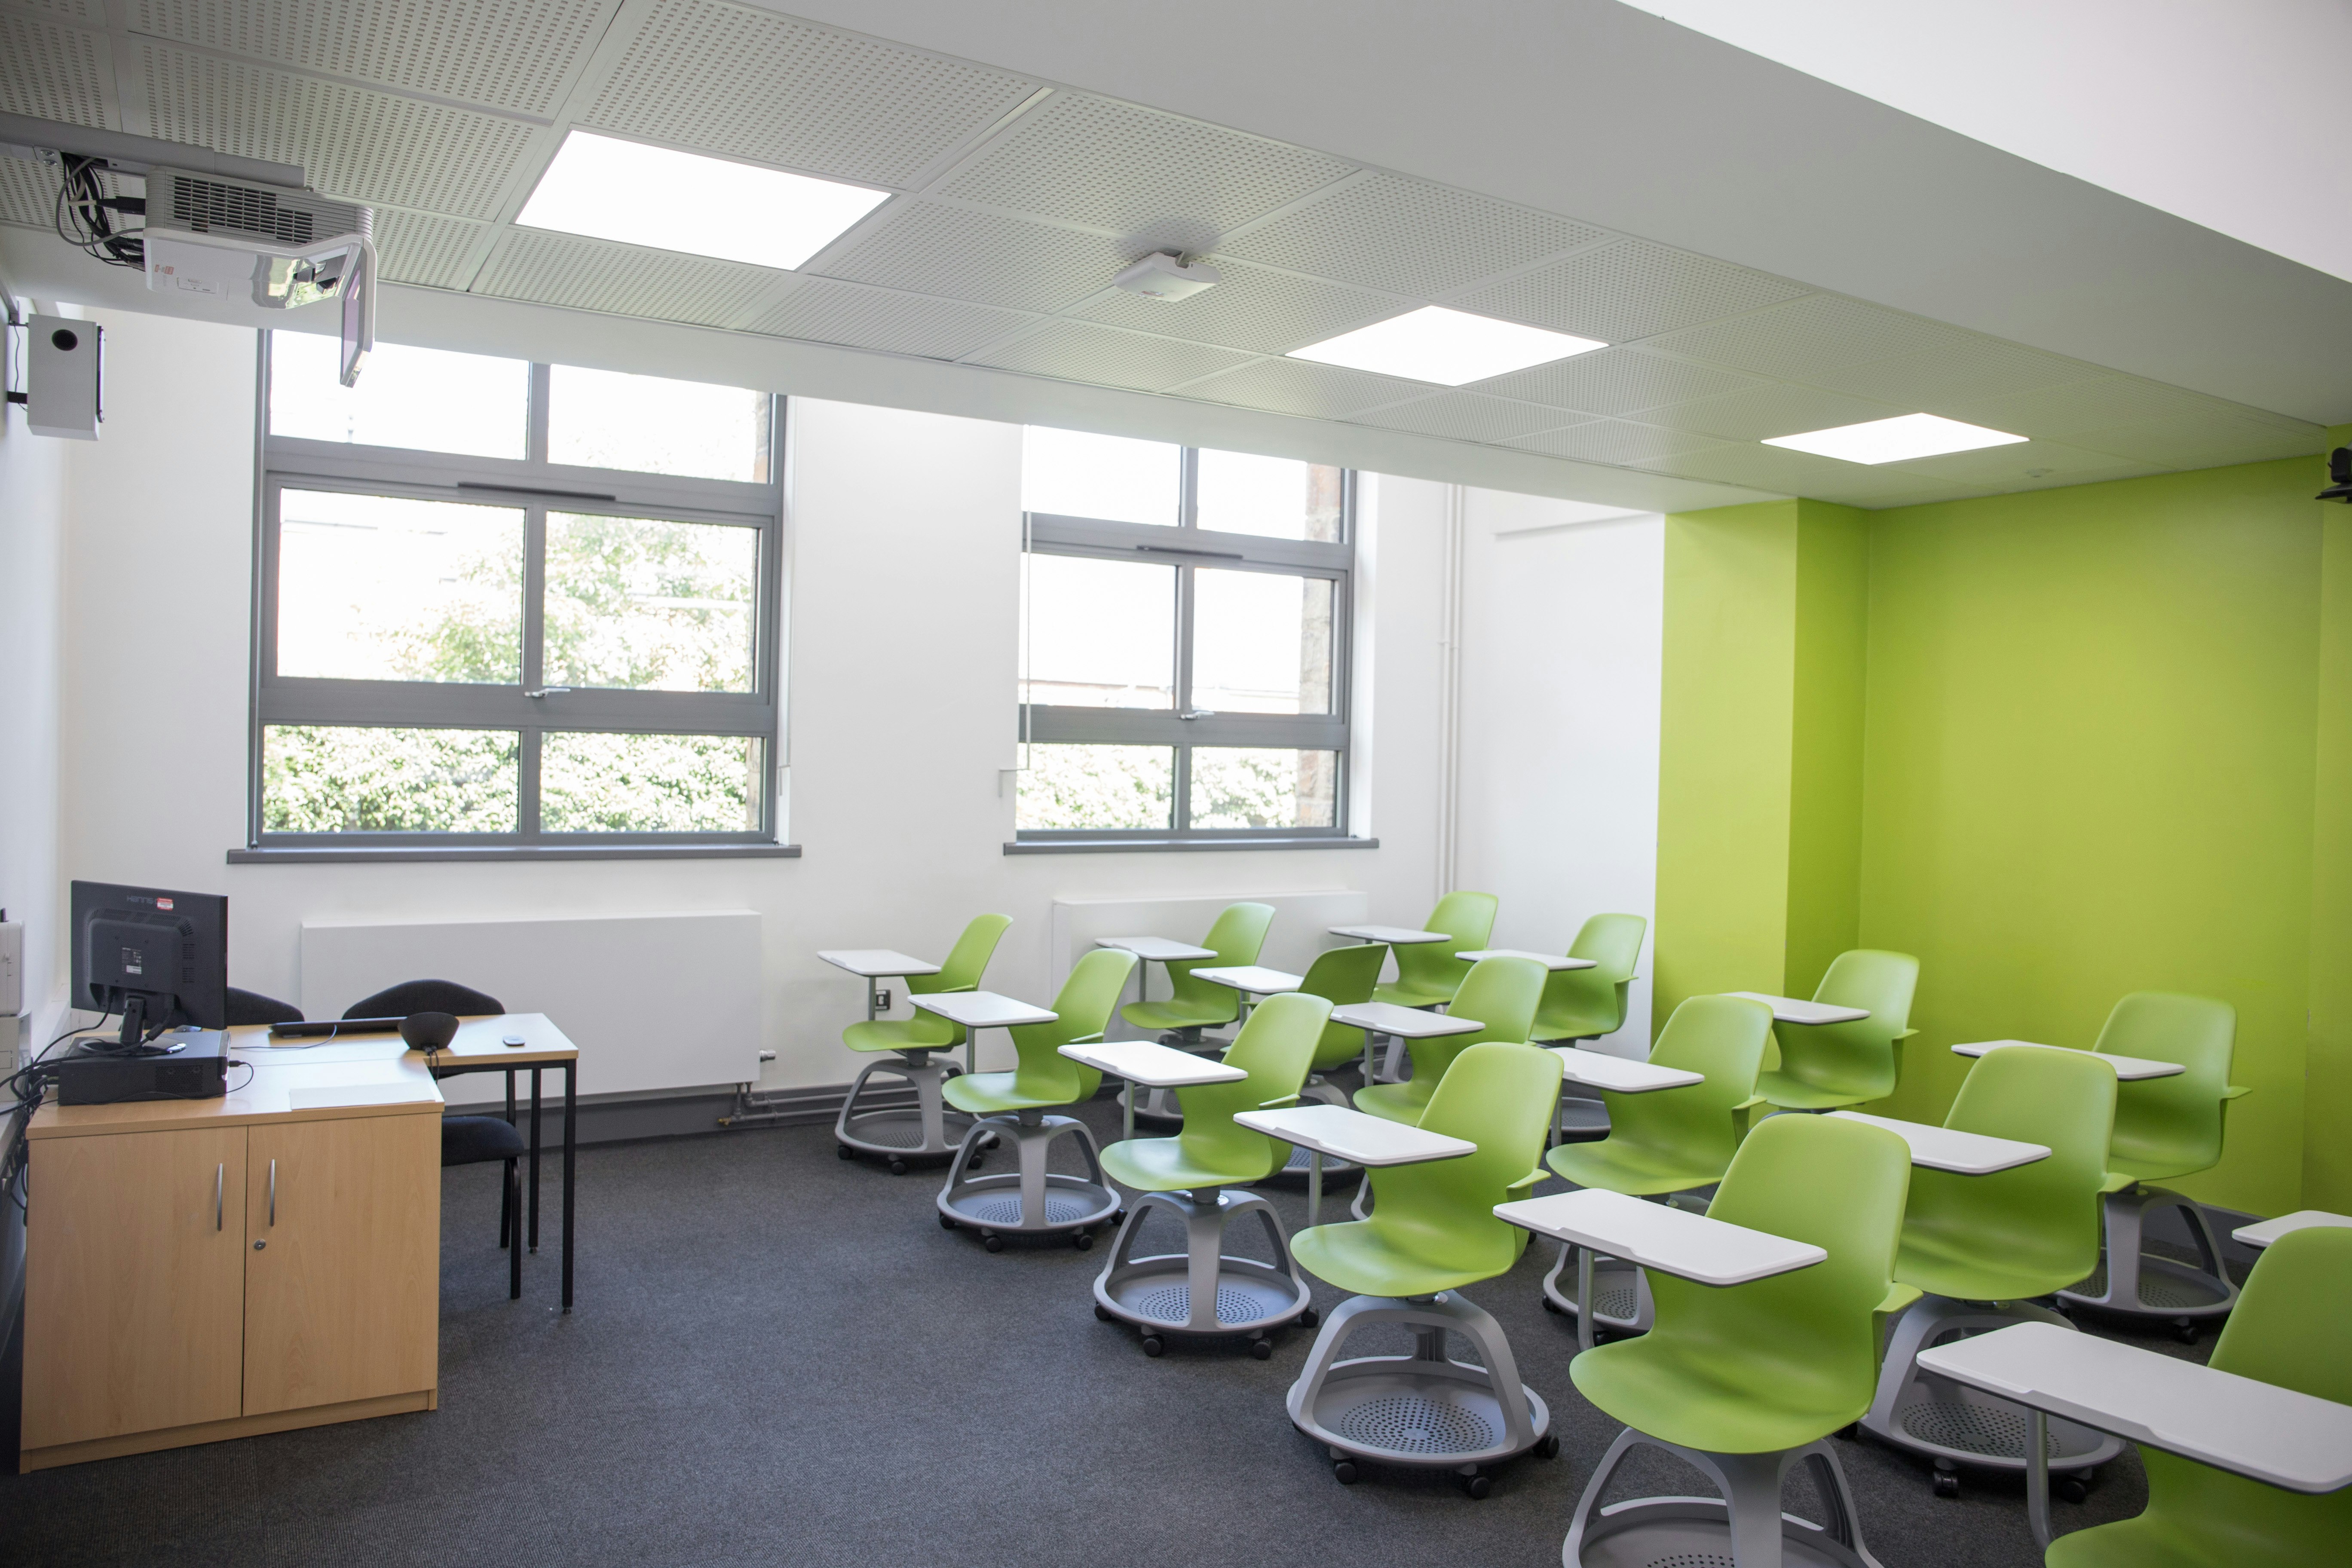 Chesterfield College - Classrooms image 1